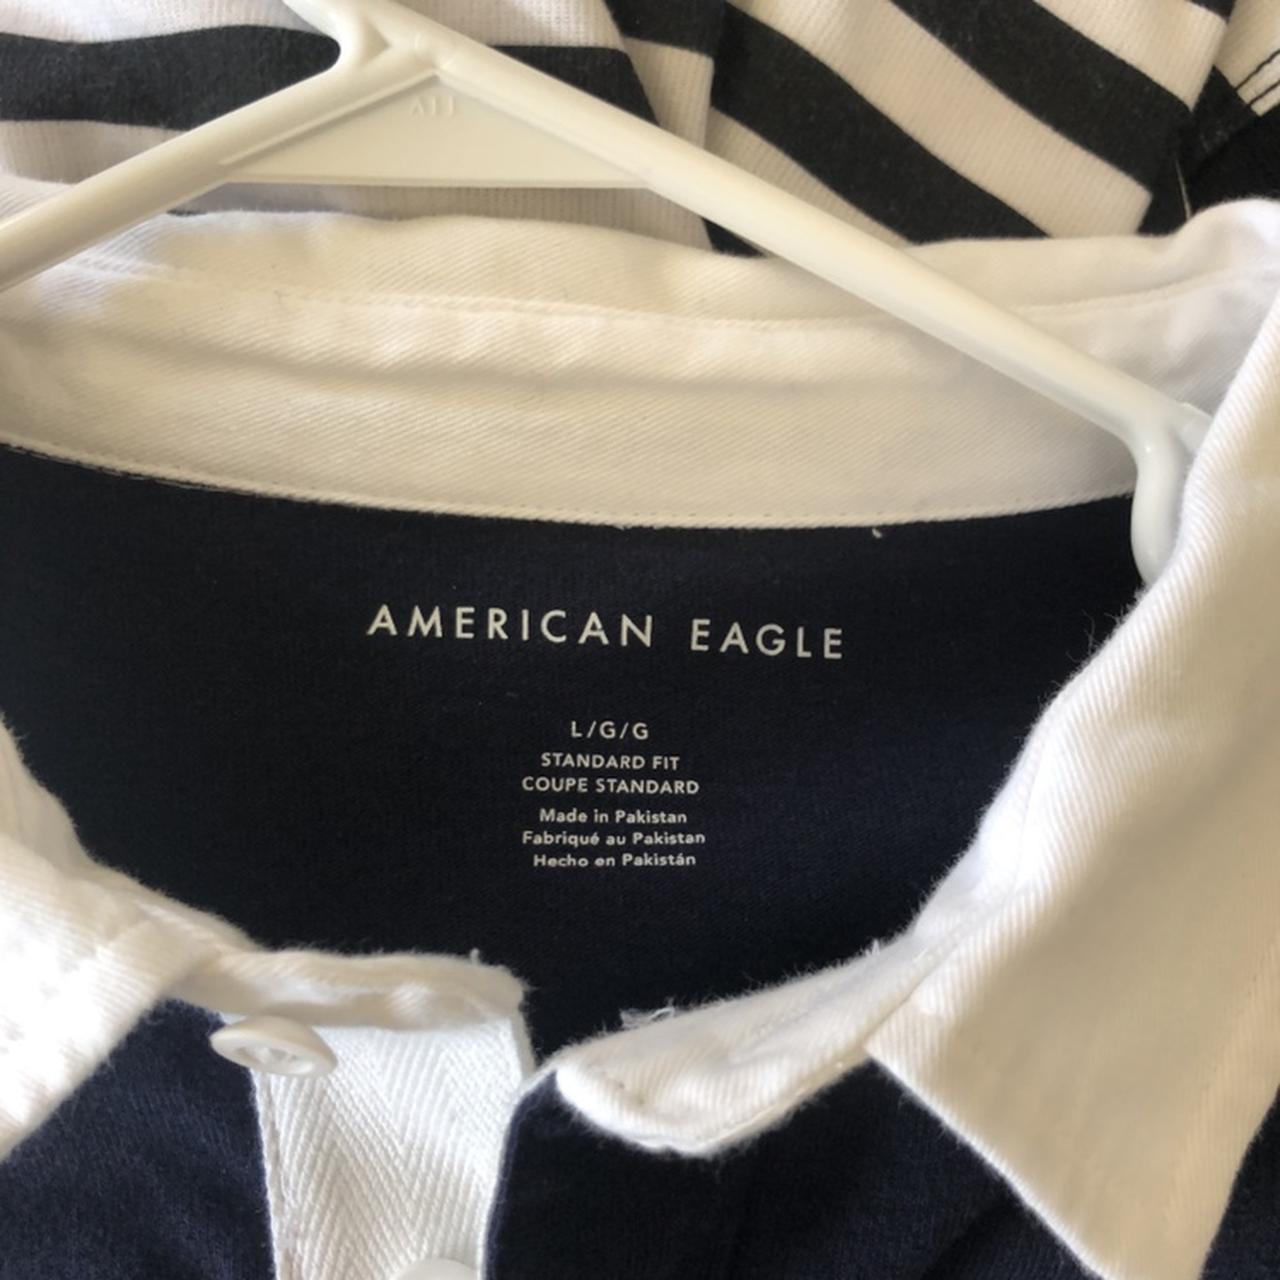 American Eagle rugby shirt never worn except this... - Depop